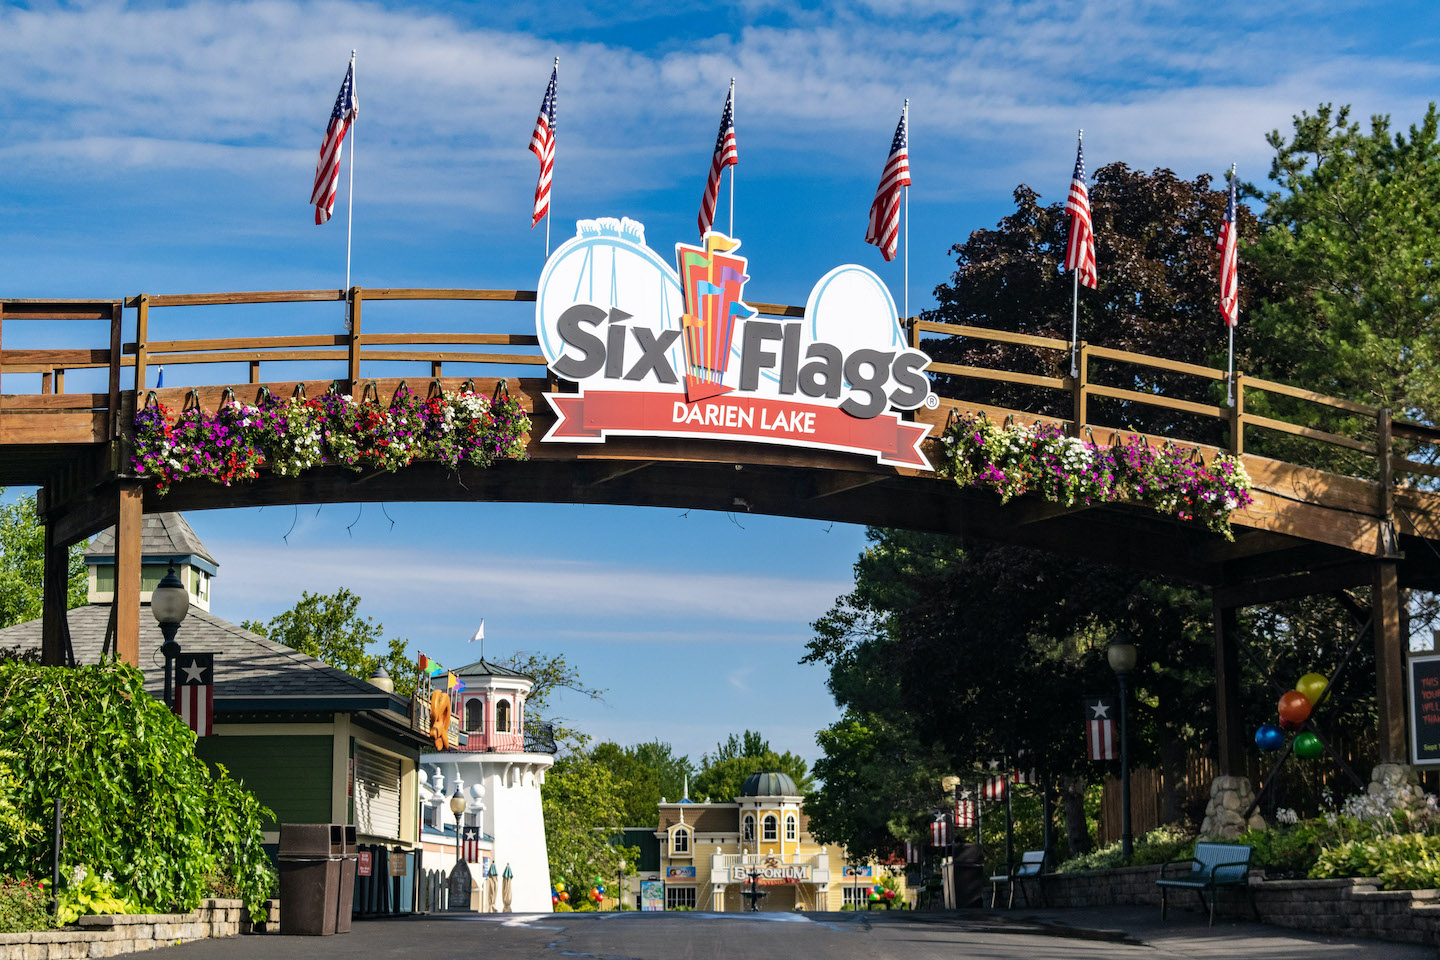 Images courtesy of Six Flags Darien Lake